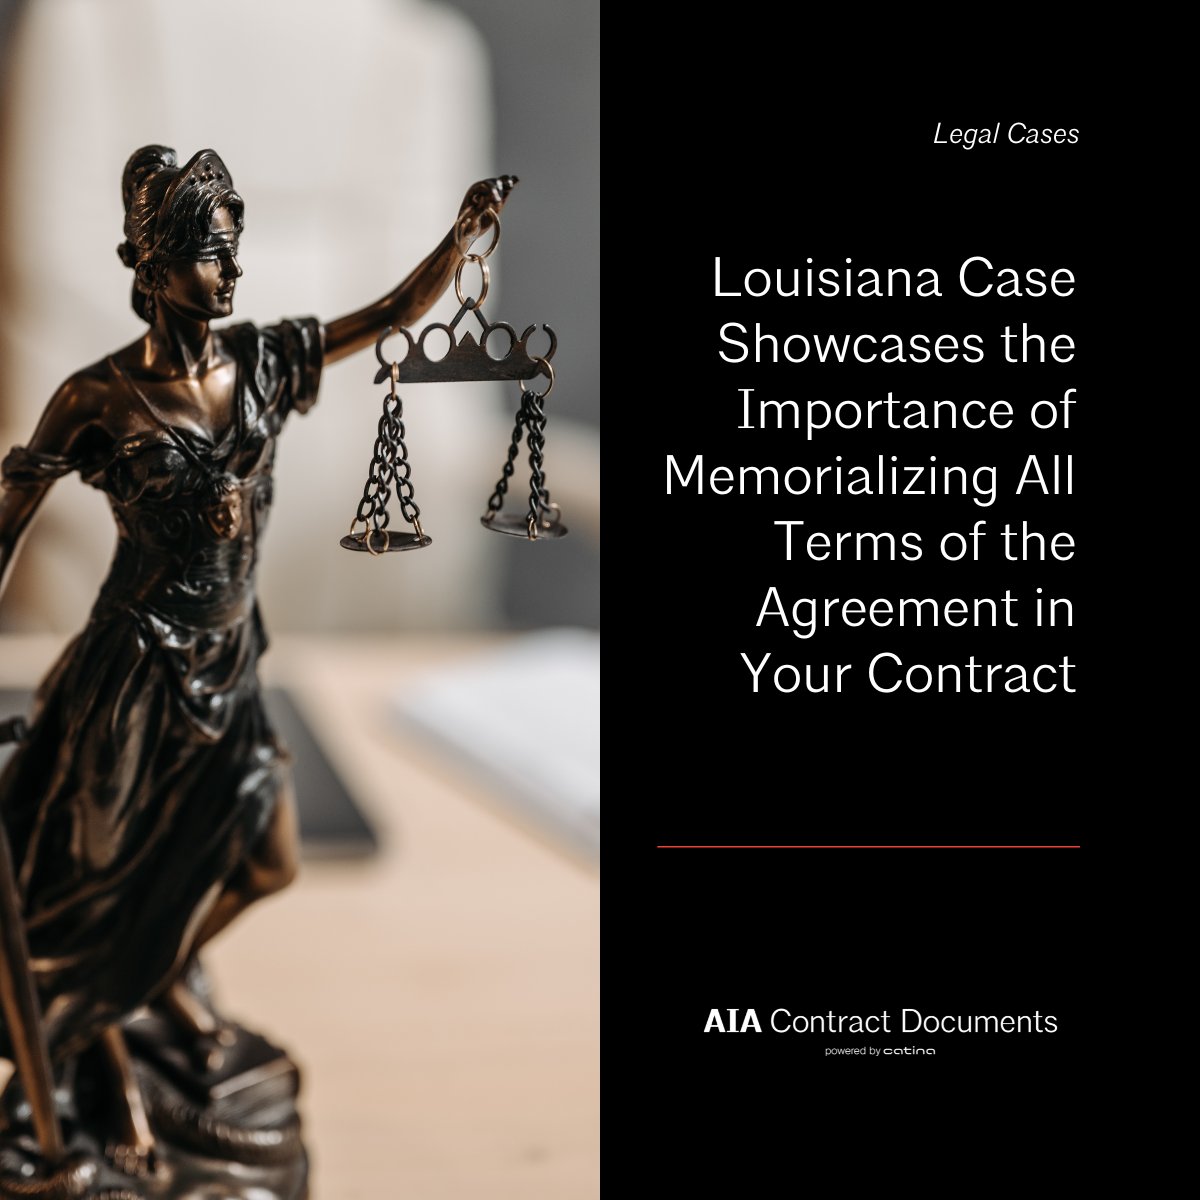 Don't rely on side agreements! The importance of clearly memorializing all terms of a contract has been demonstrated by a Louisiana construction case. Learn more: bit.ly/3TN7pnp #RiskManagement #ConstructionContracts #ConstructionLaw